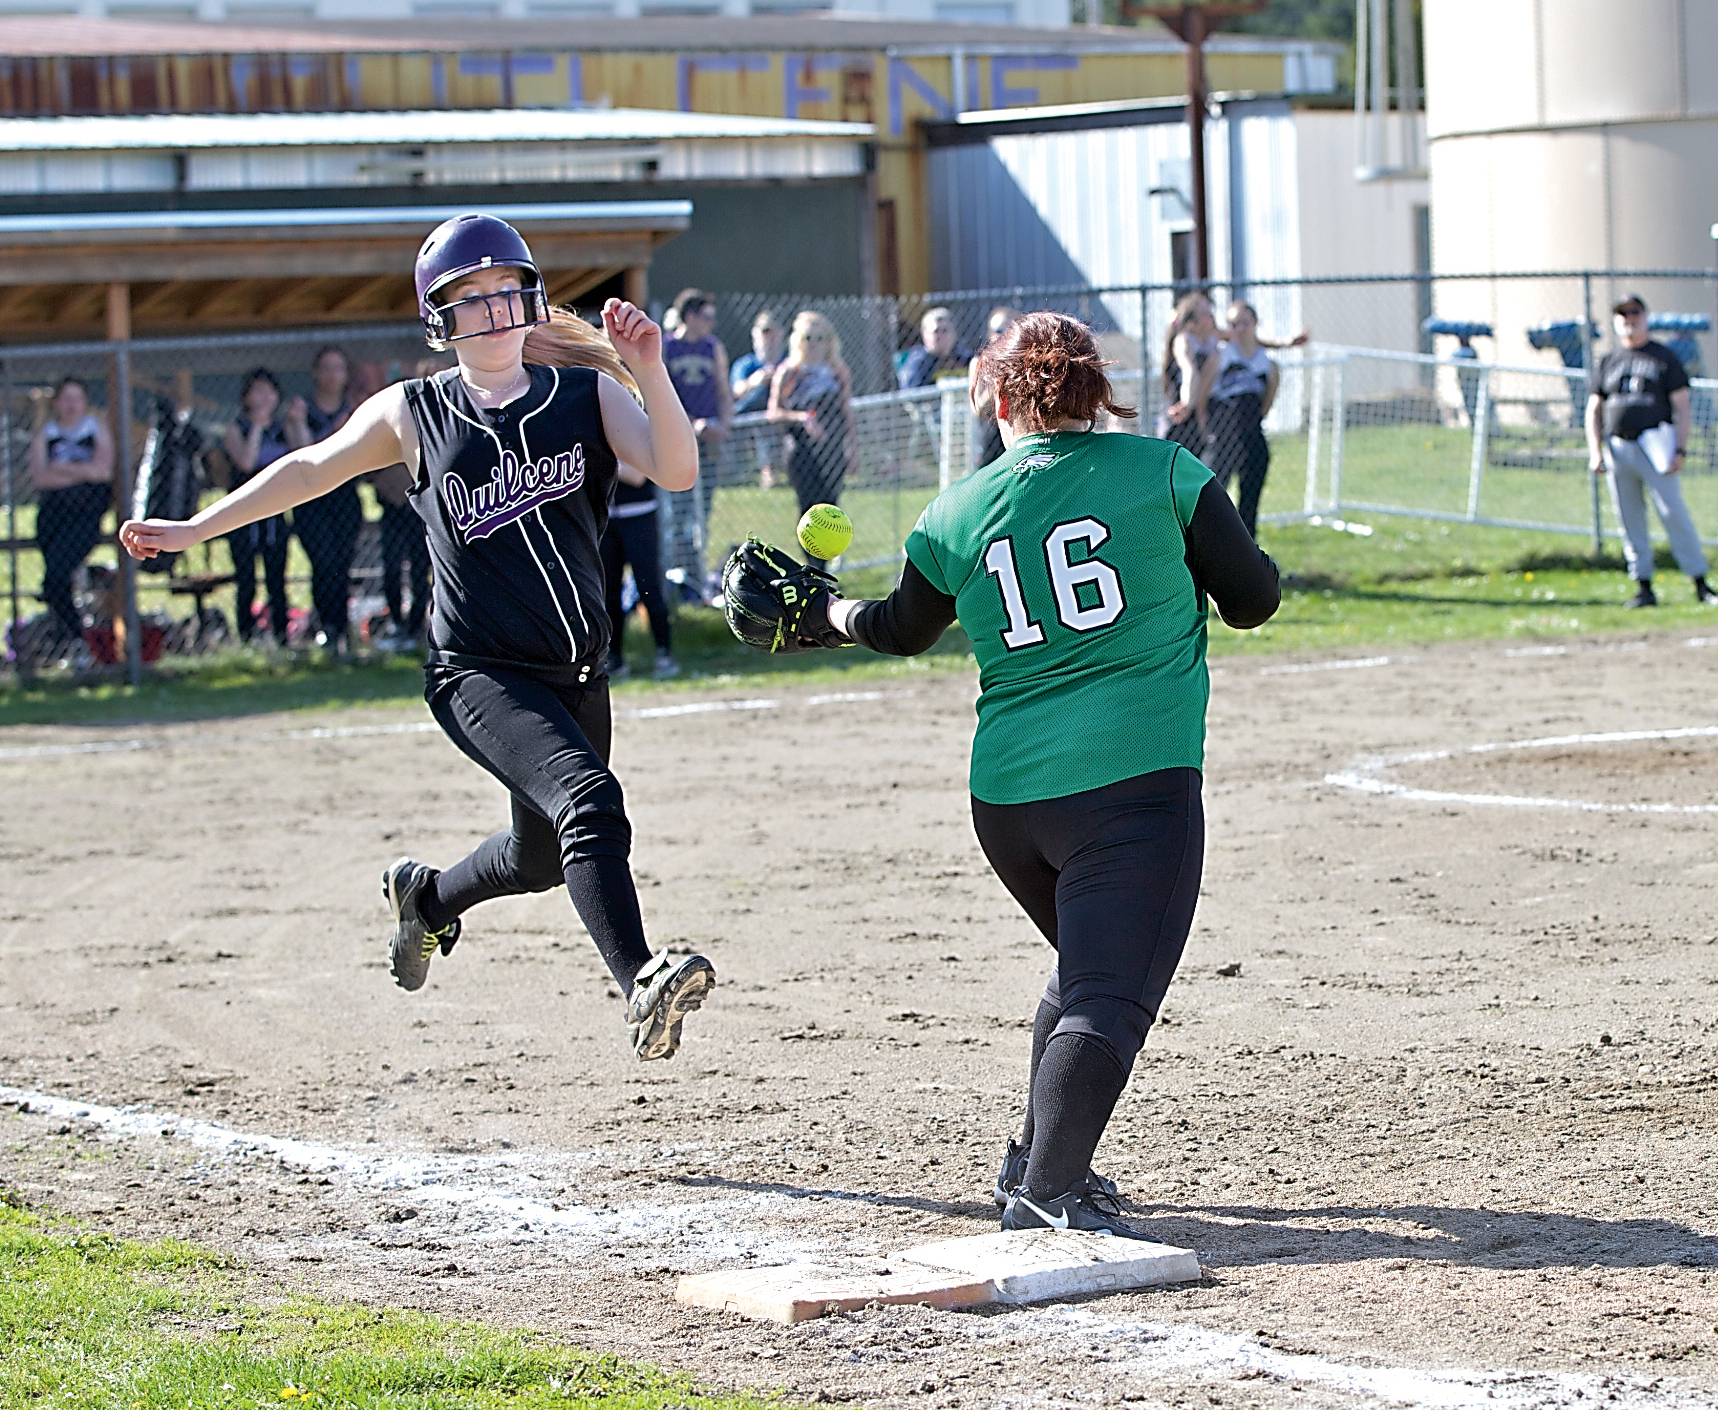 Quilcene's Emily Ward reaches safely on an error after Klahowya first baseman Natalie Barnes bobbled the ball. Steve Mullensky/for Peninsula Daily News